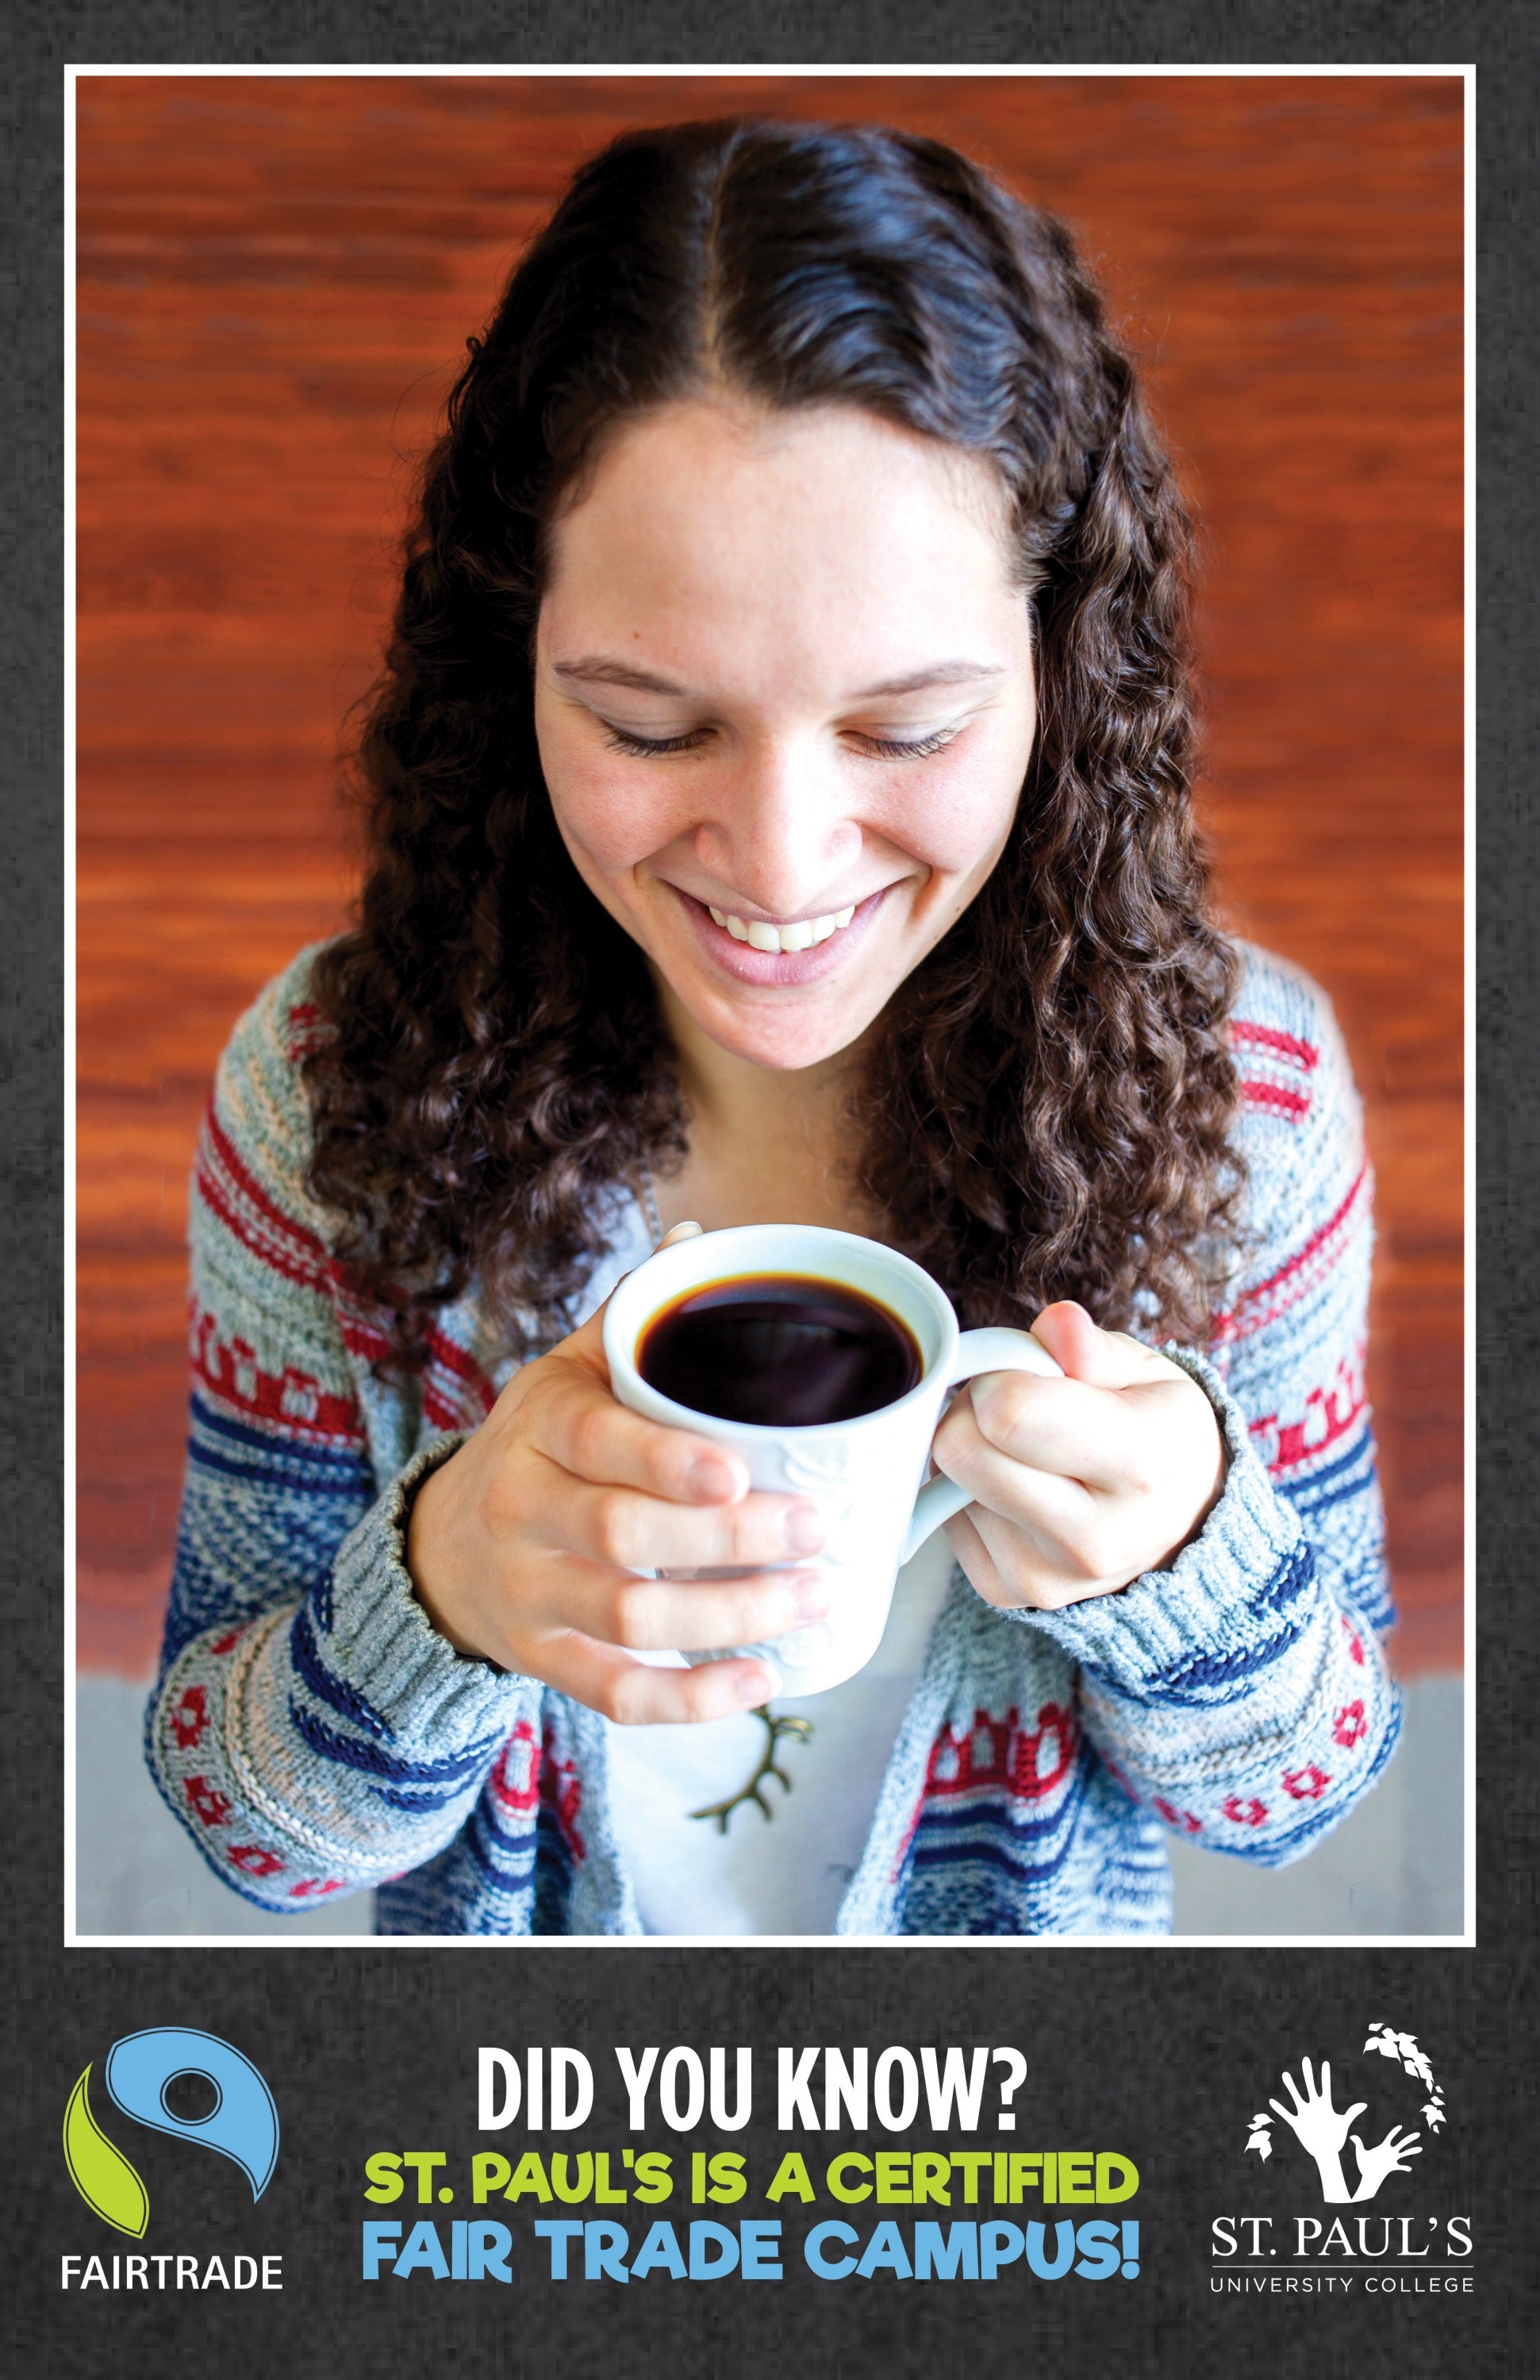 Poster of female student holding Fair Trade coffee